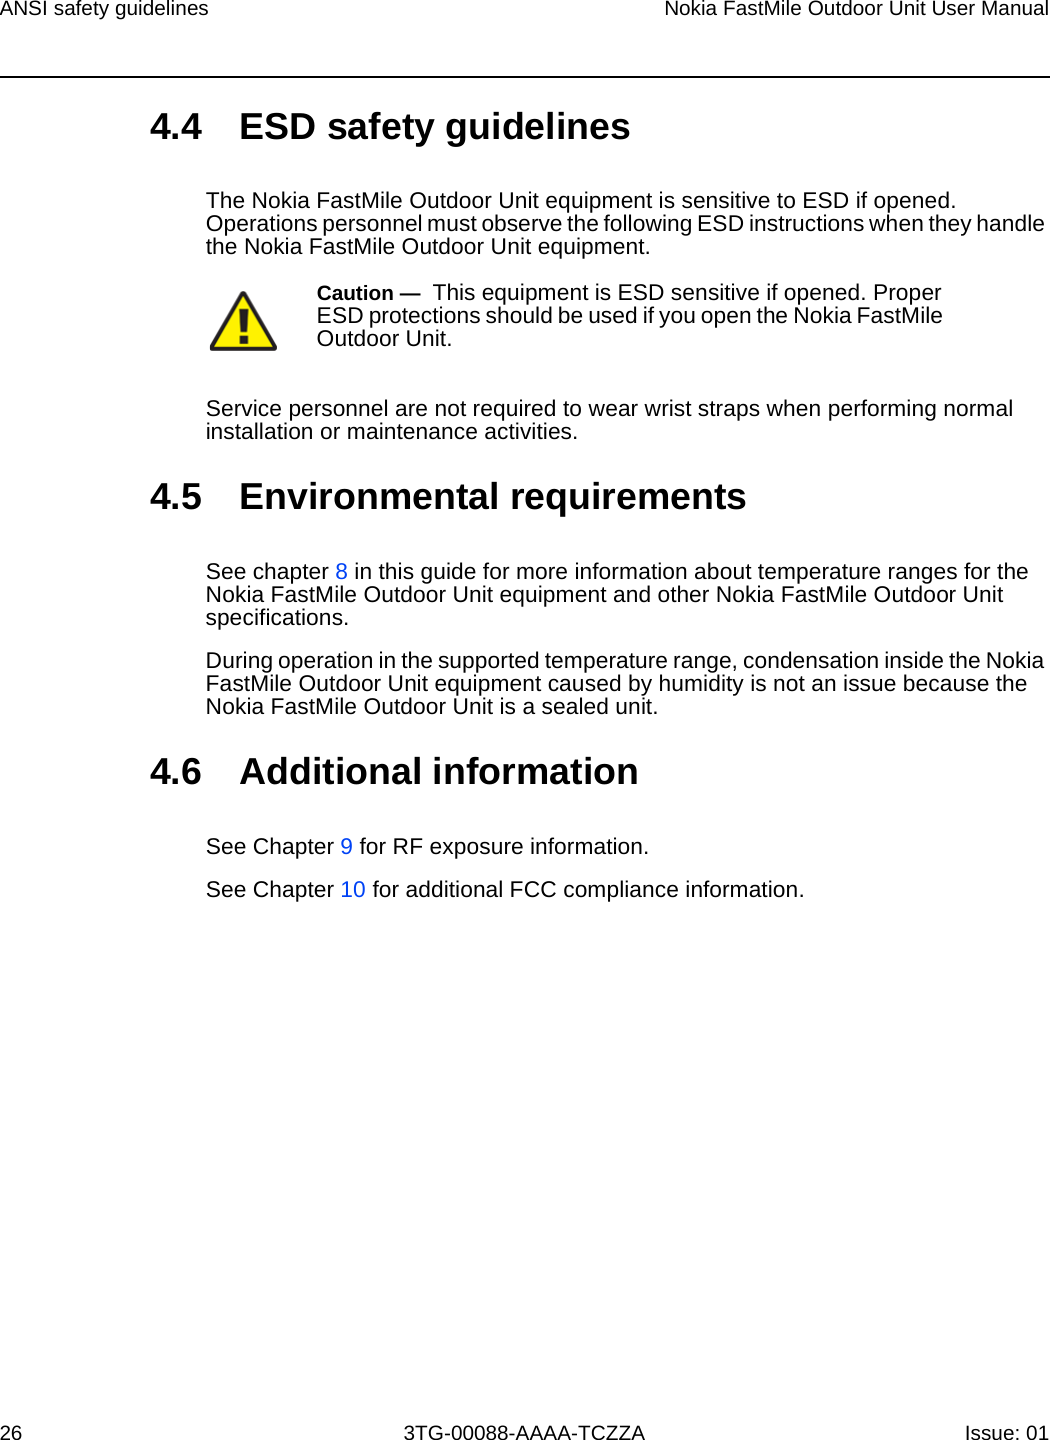 ANSI safety guidelines26Nokia FastMile Outdoor Unit User Manual3TG-00088-AAAA-TCZZA Issue: 014.4 ESD safety guidelinesThe Nokia FastMile Outdoor Unit equipment is sensitive to ESD if opened. Operations personnel must observe the following ESD instructions when they handle the Nokia FastMile Outdoor Unit equipment. Service personnel are not required to wear wrist straps when performing normal installation or maintenance activities.4.5 Environmental requirementsSee chapter 8 in this guide for more information about temperature ranges for the Nokia FastMile Outdoor Unit equipment and other Nokia FastMile Outdoor Unit specifications. During operation in the supported temperature range, condensation inside the Nokia FastMile Outdoor Unit equipment caused by humidity is not an issue because the Nokia FastMile Outdoor Unit is a sealed unit.4.6 Additional informationSee Chapter 9 for RF exposure information.See Chapter 10 for additional FCC compliance information.Caution —  This equipment is ESD sensitive if opened. Proper ESD protections should be used if you open the Nokia FastMile Outdoor Unit.